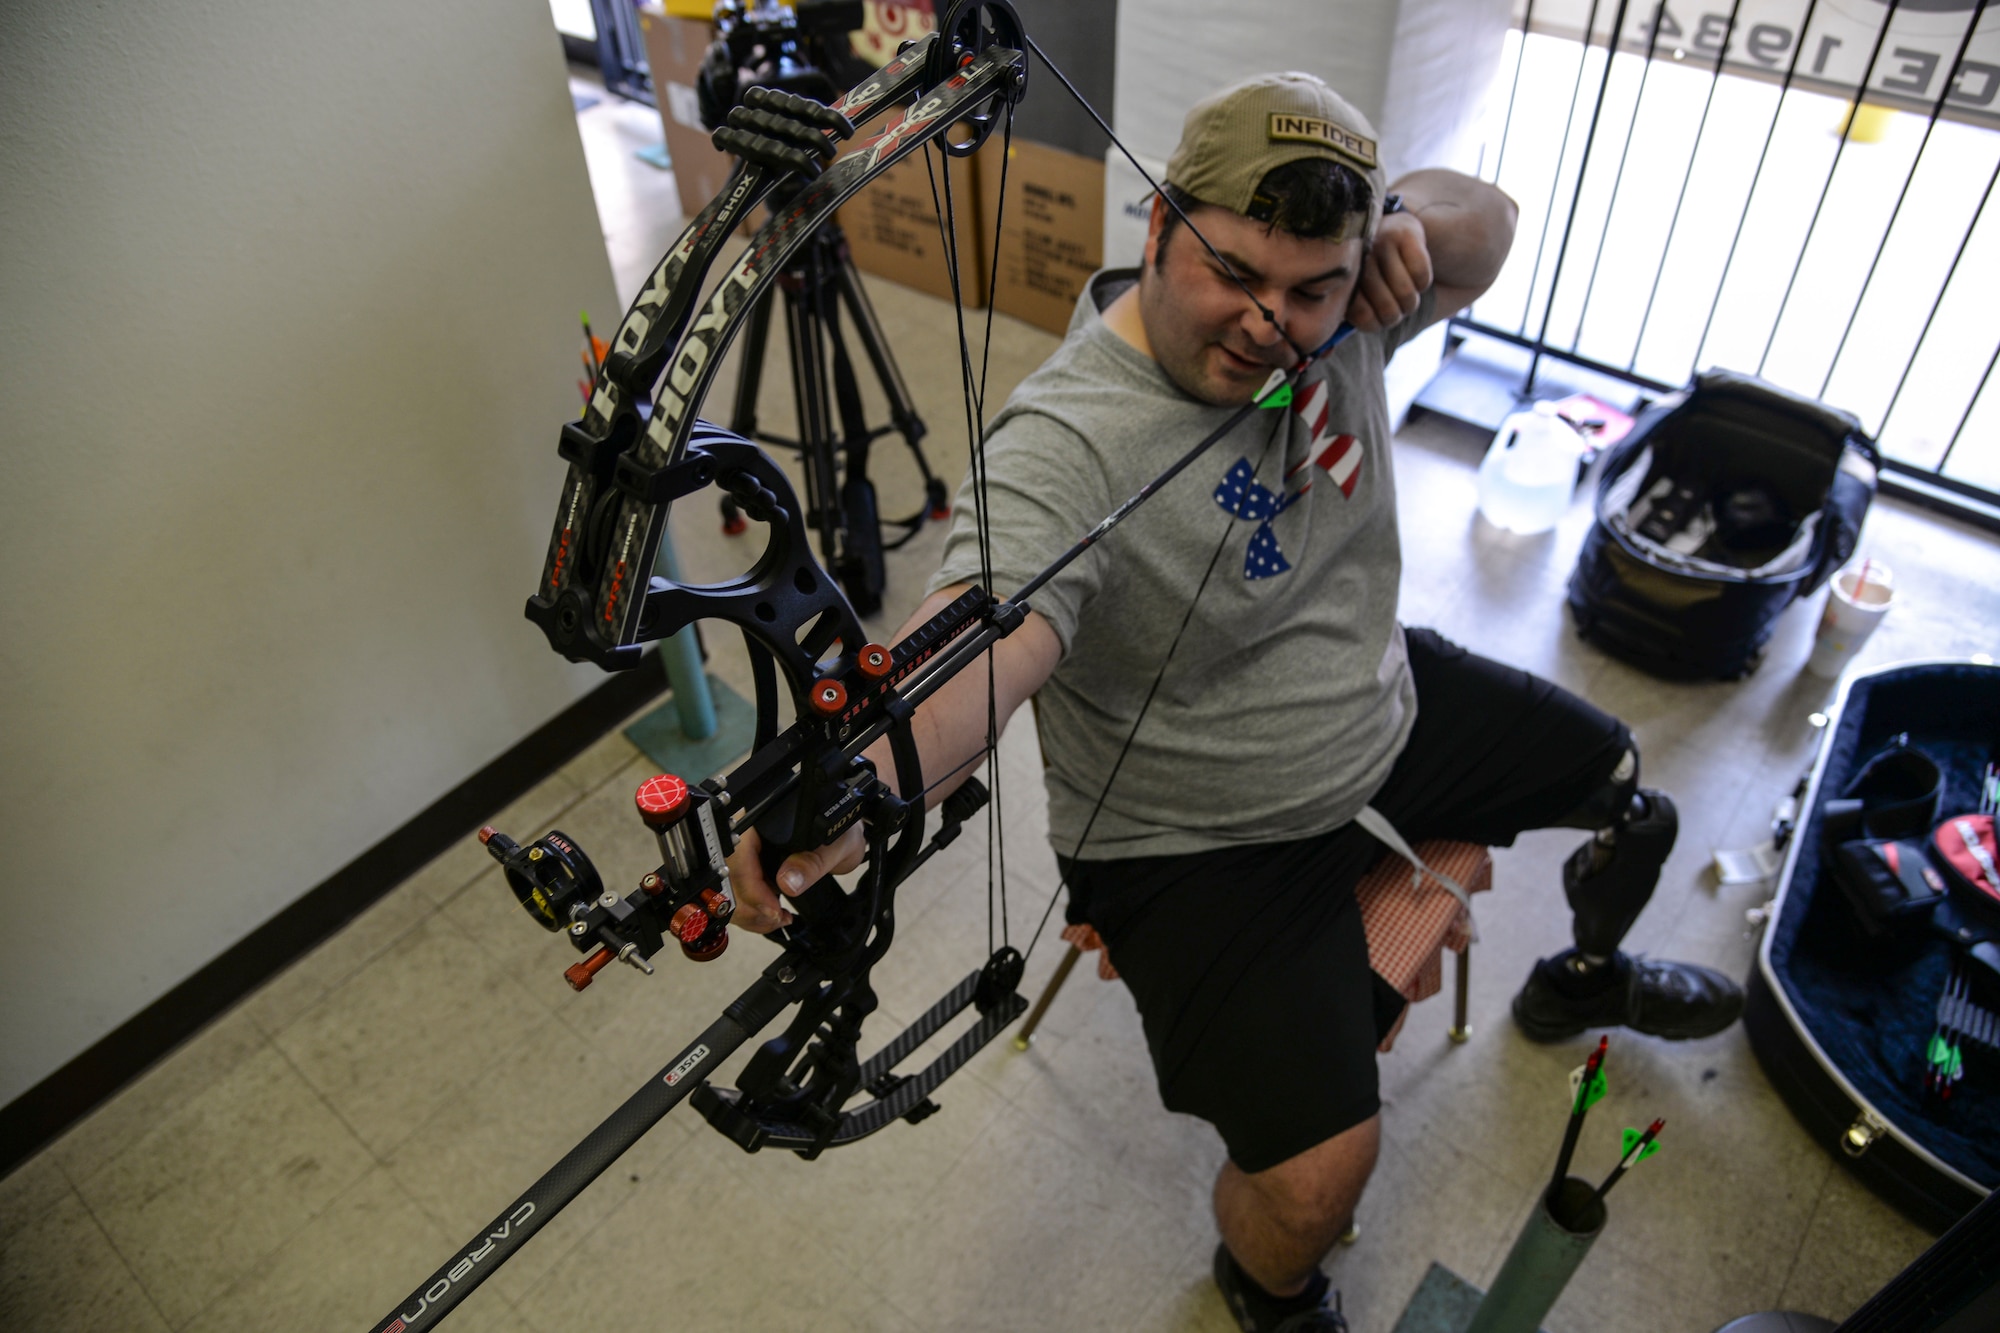 Staff Sgt. Seth Pena readies his compound bow to strike a target 25 meters away Sept. 14, 2014, at a local archery facility in San Antonio. Pena is vying for a spot on the Air Force team competing at the 2014 Warrior Games, taking place from Sept. 28 to Oct. 4, in Colorado Springs, Colorado. Pena is a former tactical control air party member and is now assigned to the 59th Medical Wing's Airman Medical Transition Unit. (U.S. Air Force photo/Senior Airman Michael Ellis)